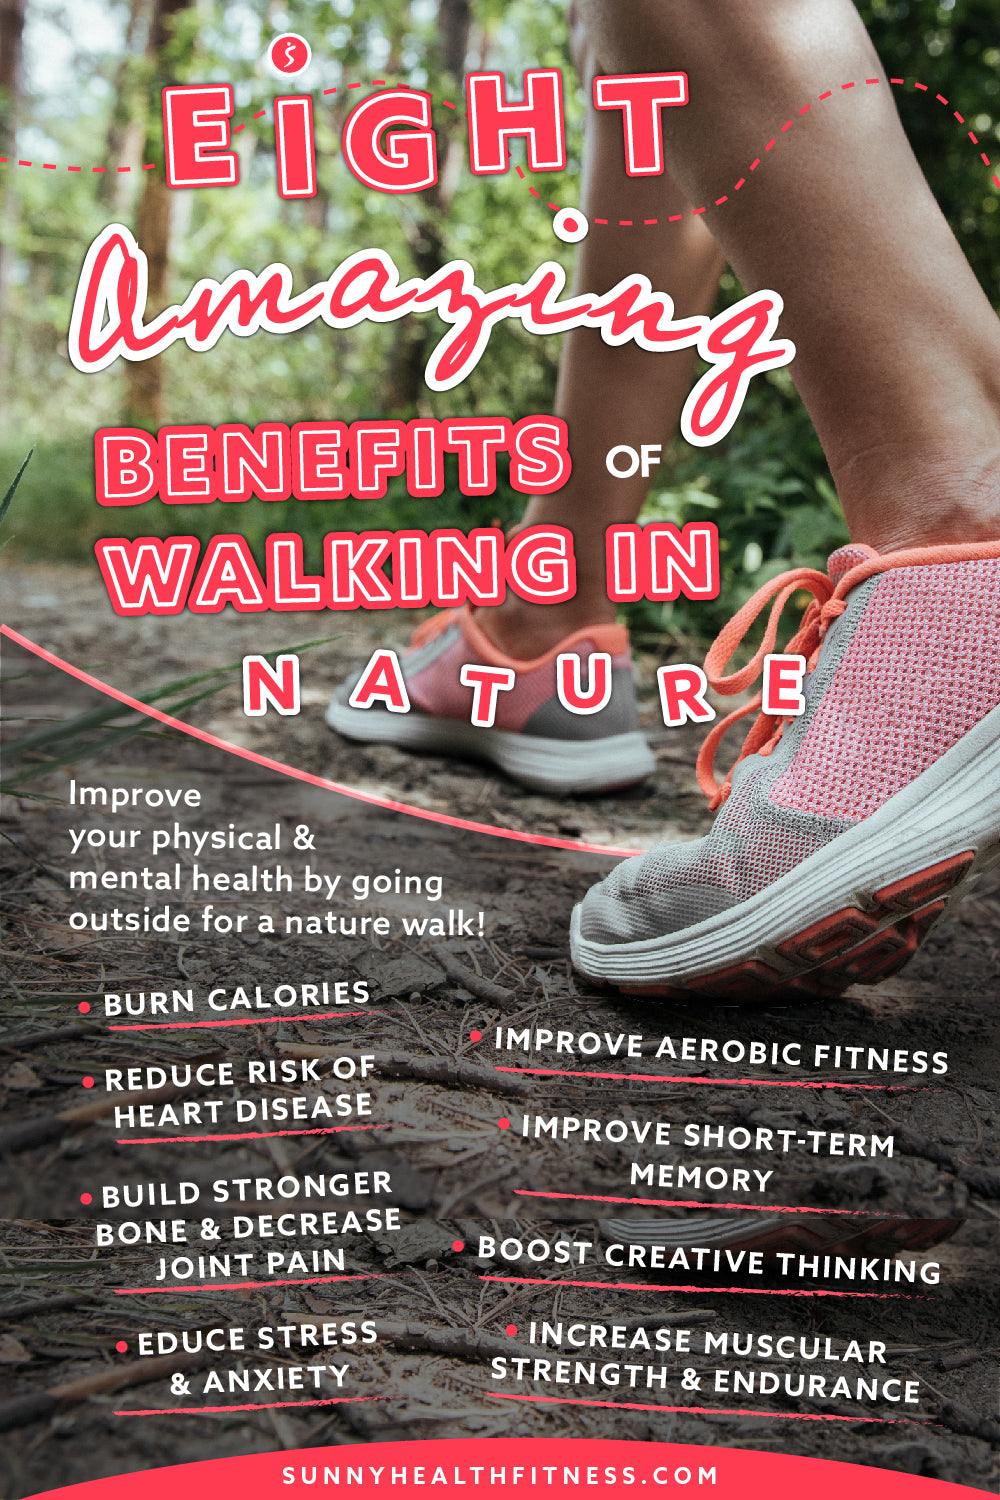 The Mental Health Benefits Of Exercising Outdoors